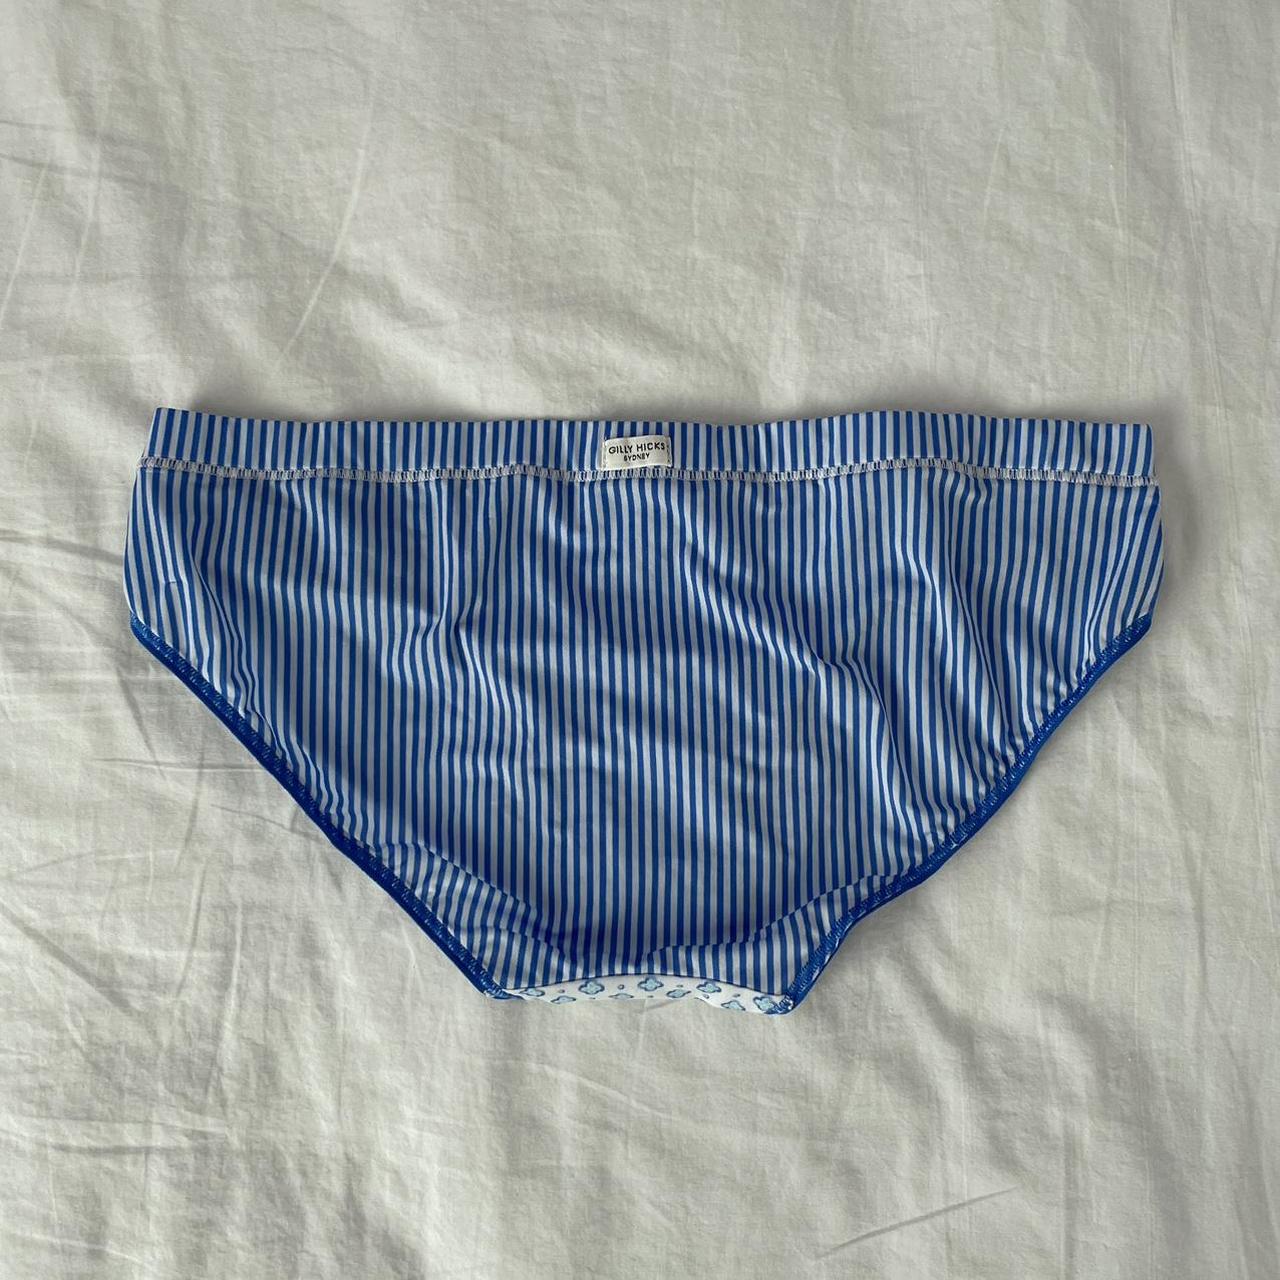 gilly hicks down undies blue and white striped